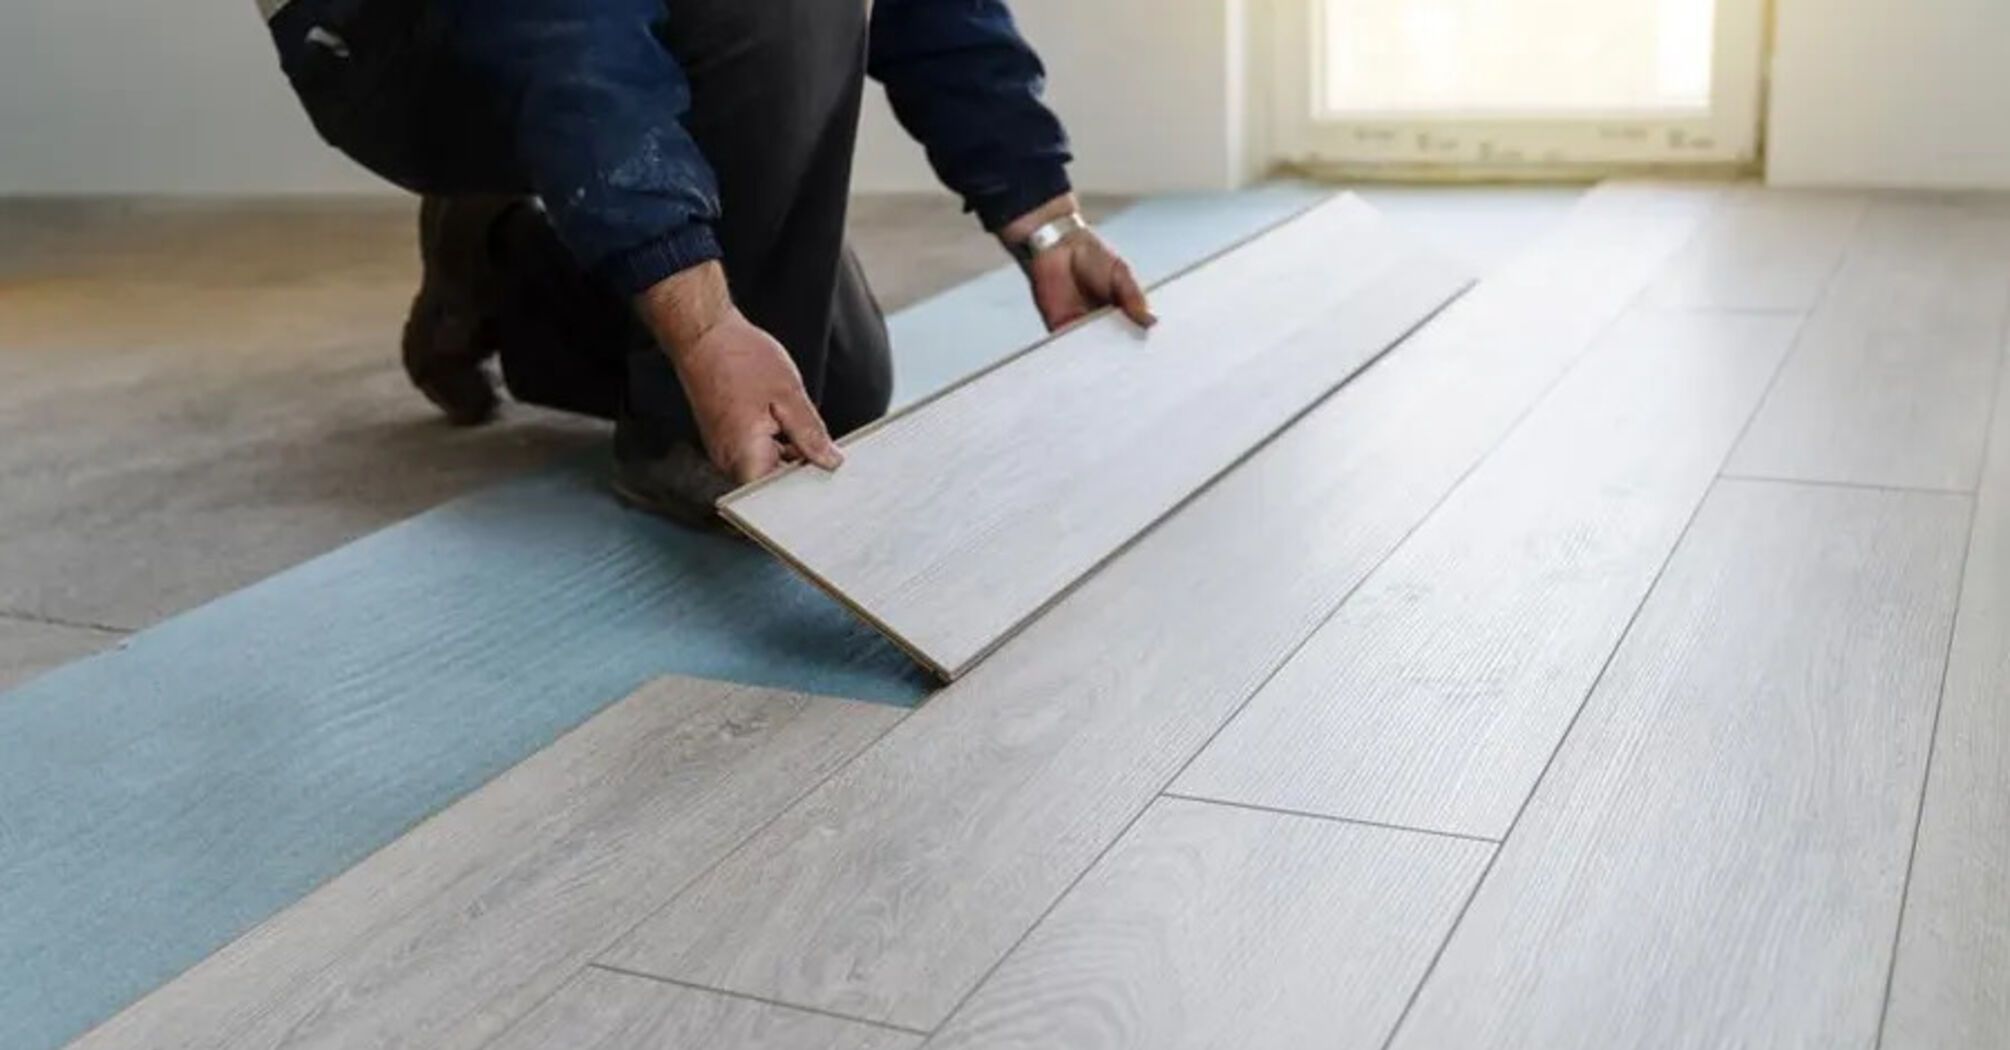 Should you install laminate flooring in your home